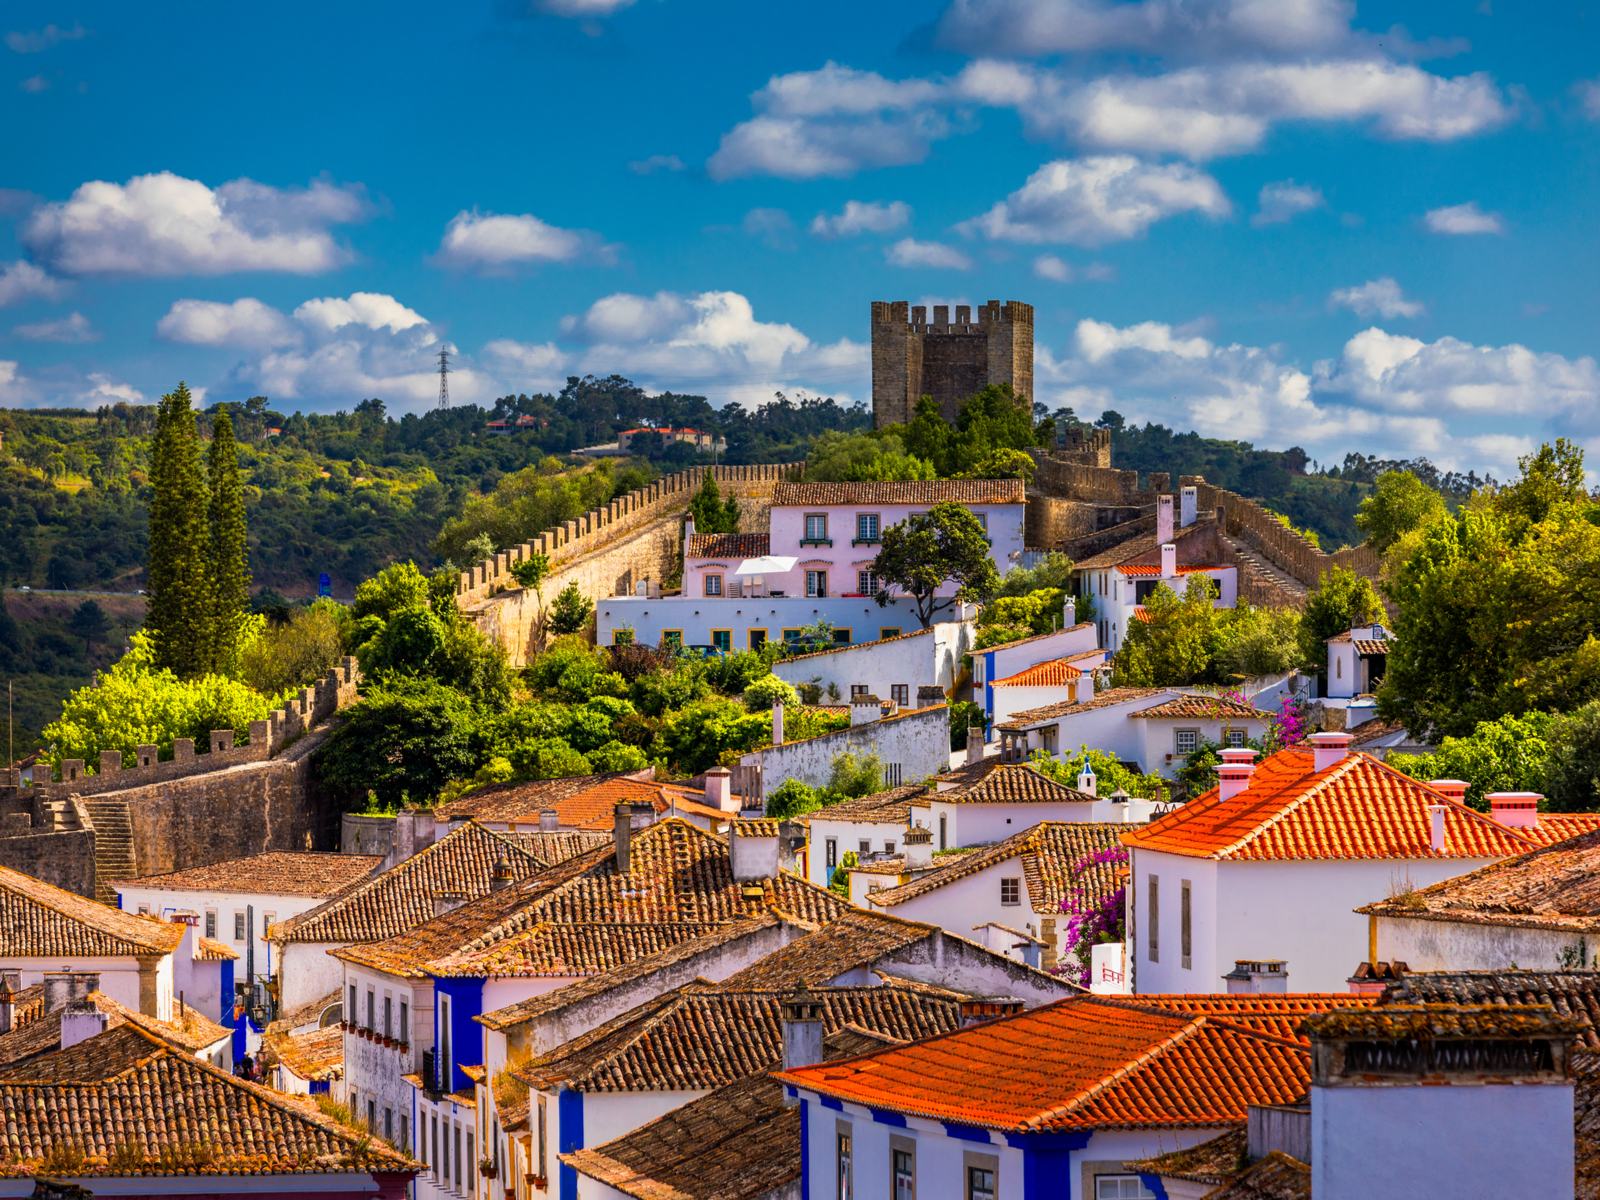 The famous walled city of Obidos, a must-visit place for anyone in Portugal